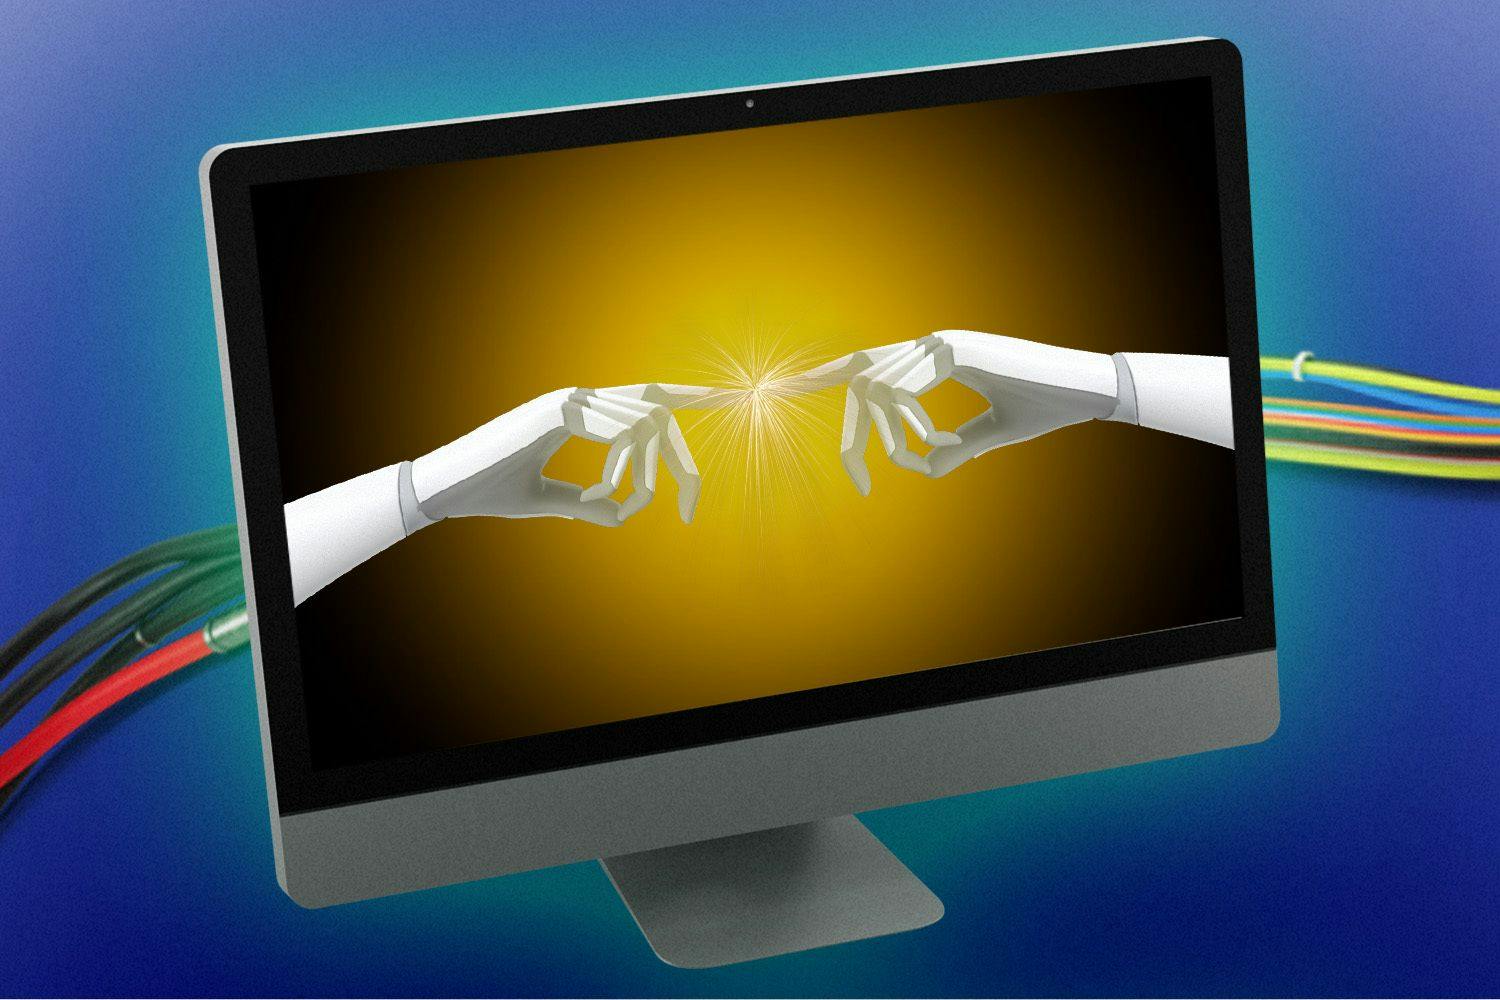 a computer featuring two hands touching, each with wires behind them